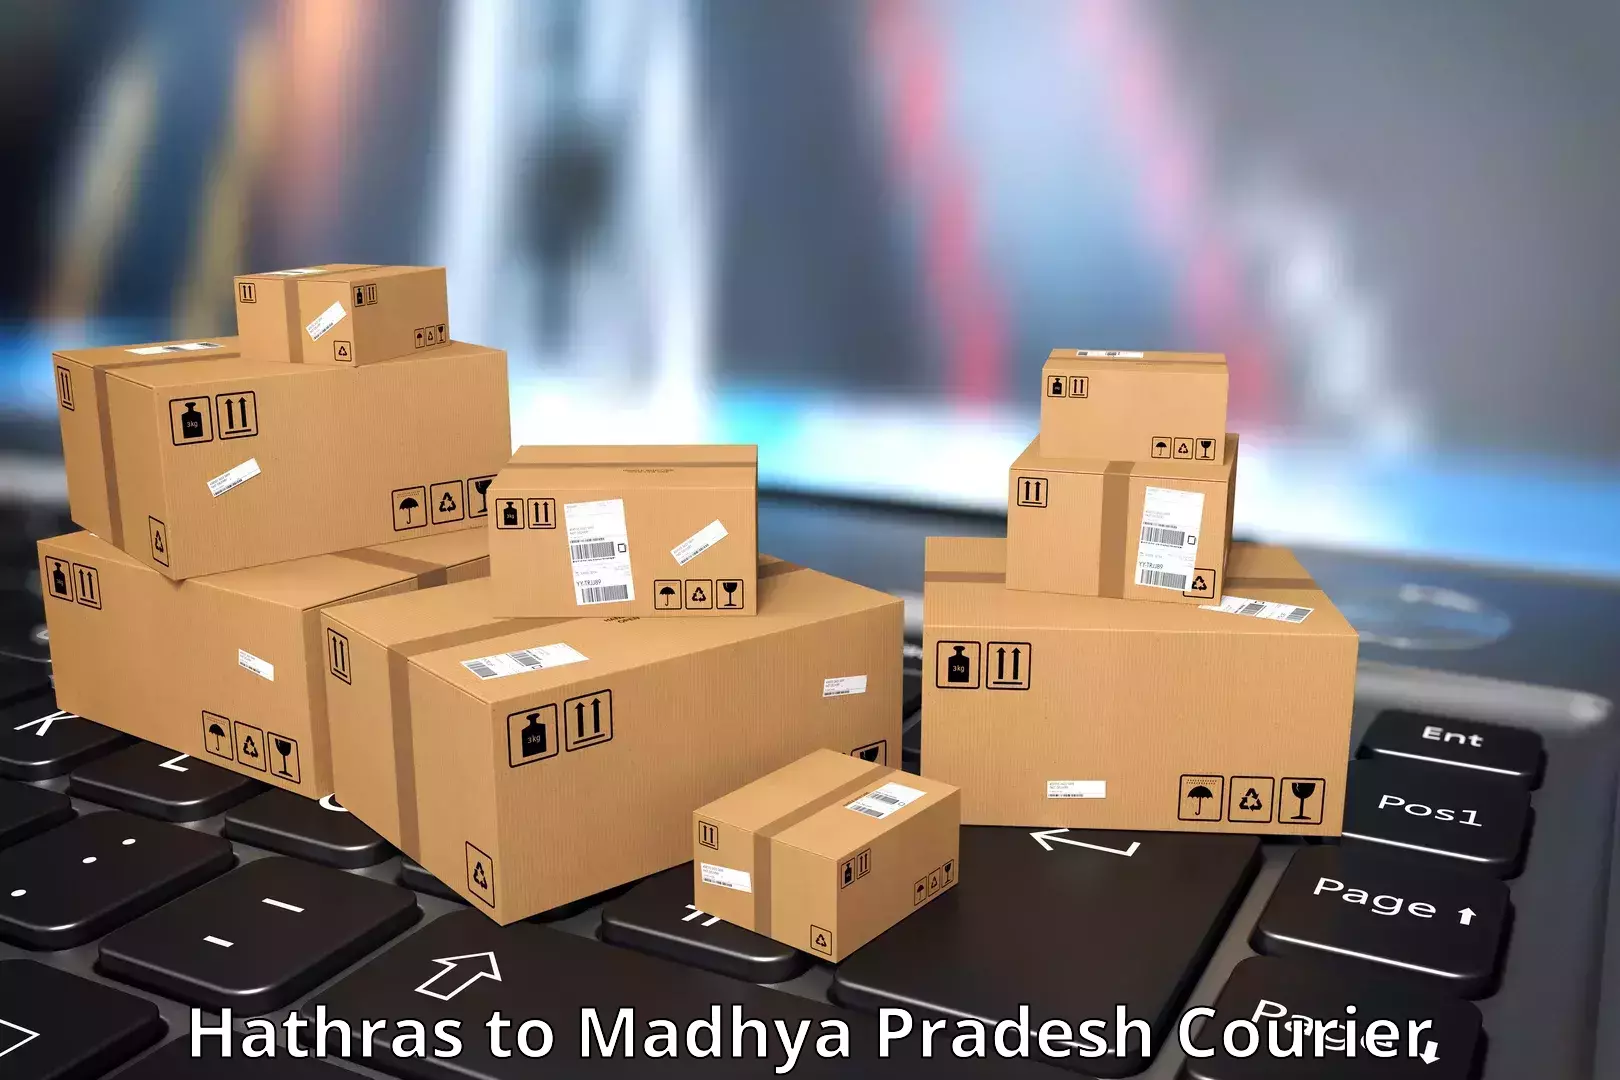 State-of-the-art courier technology Hathras to Madhya Pradesh